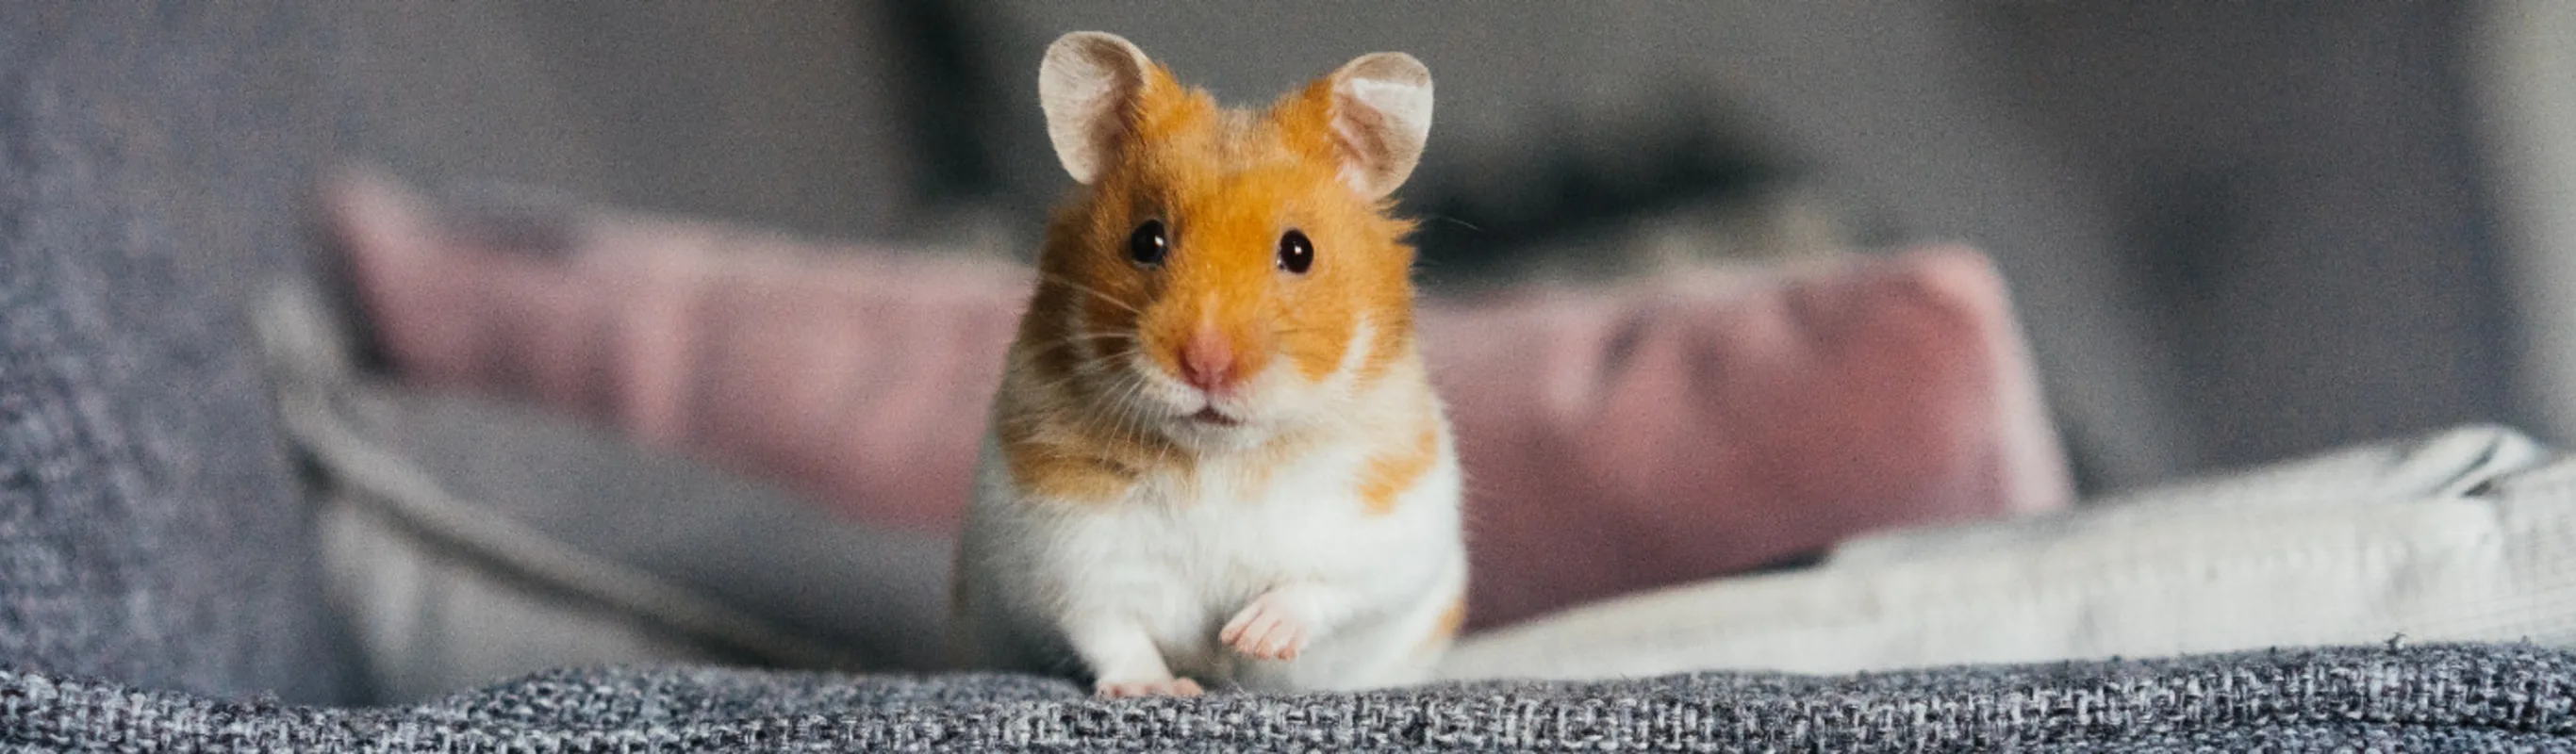 Orange Hamster Sitting on Couch